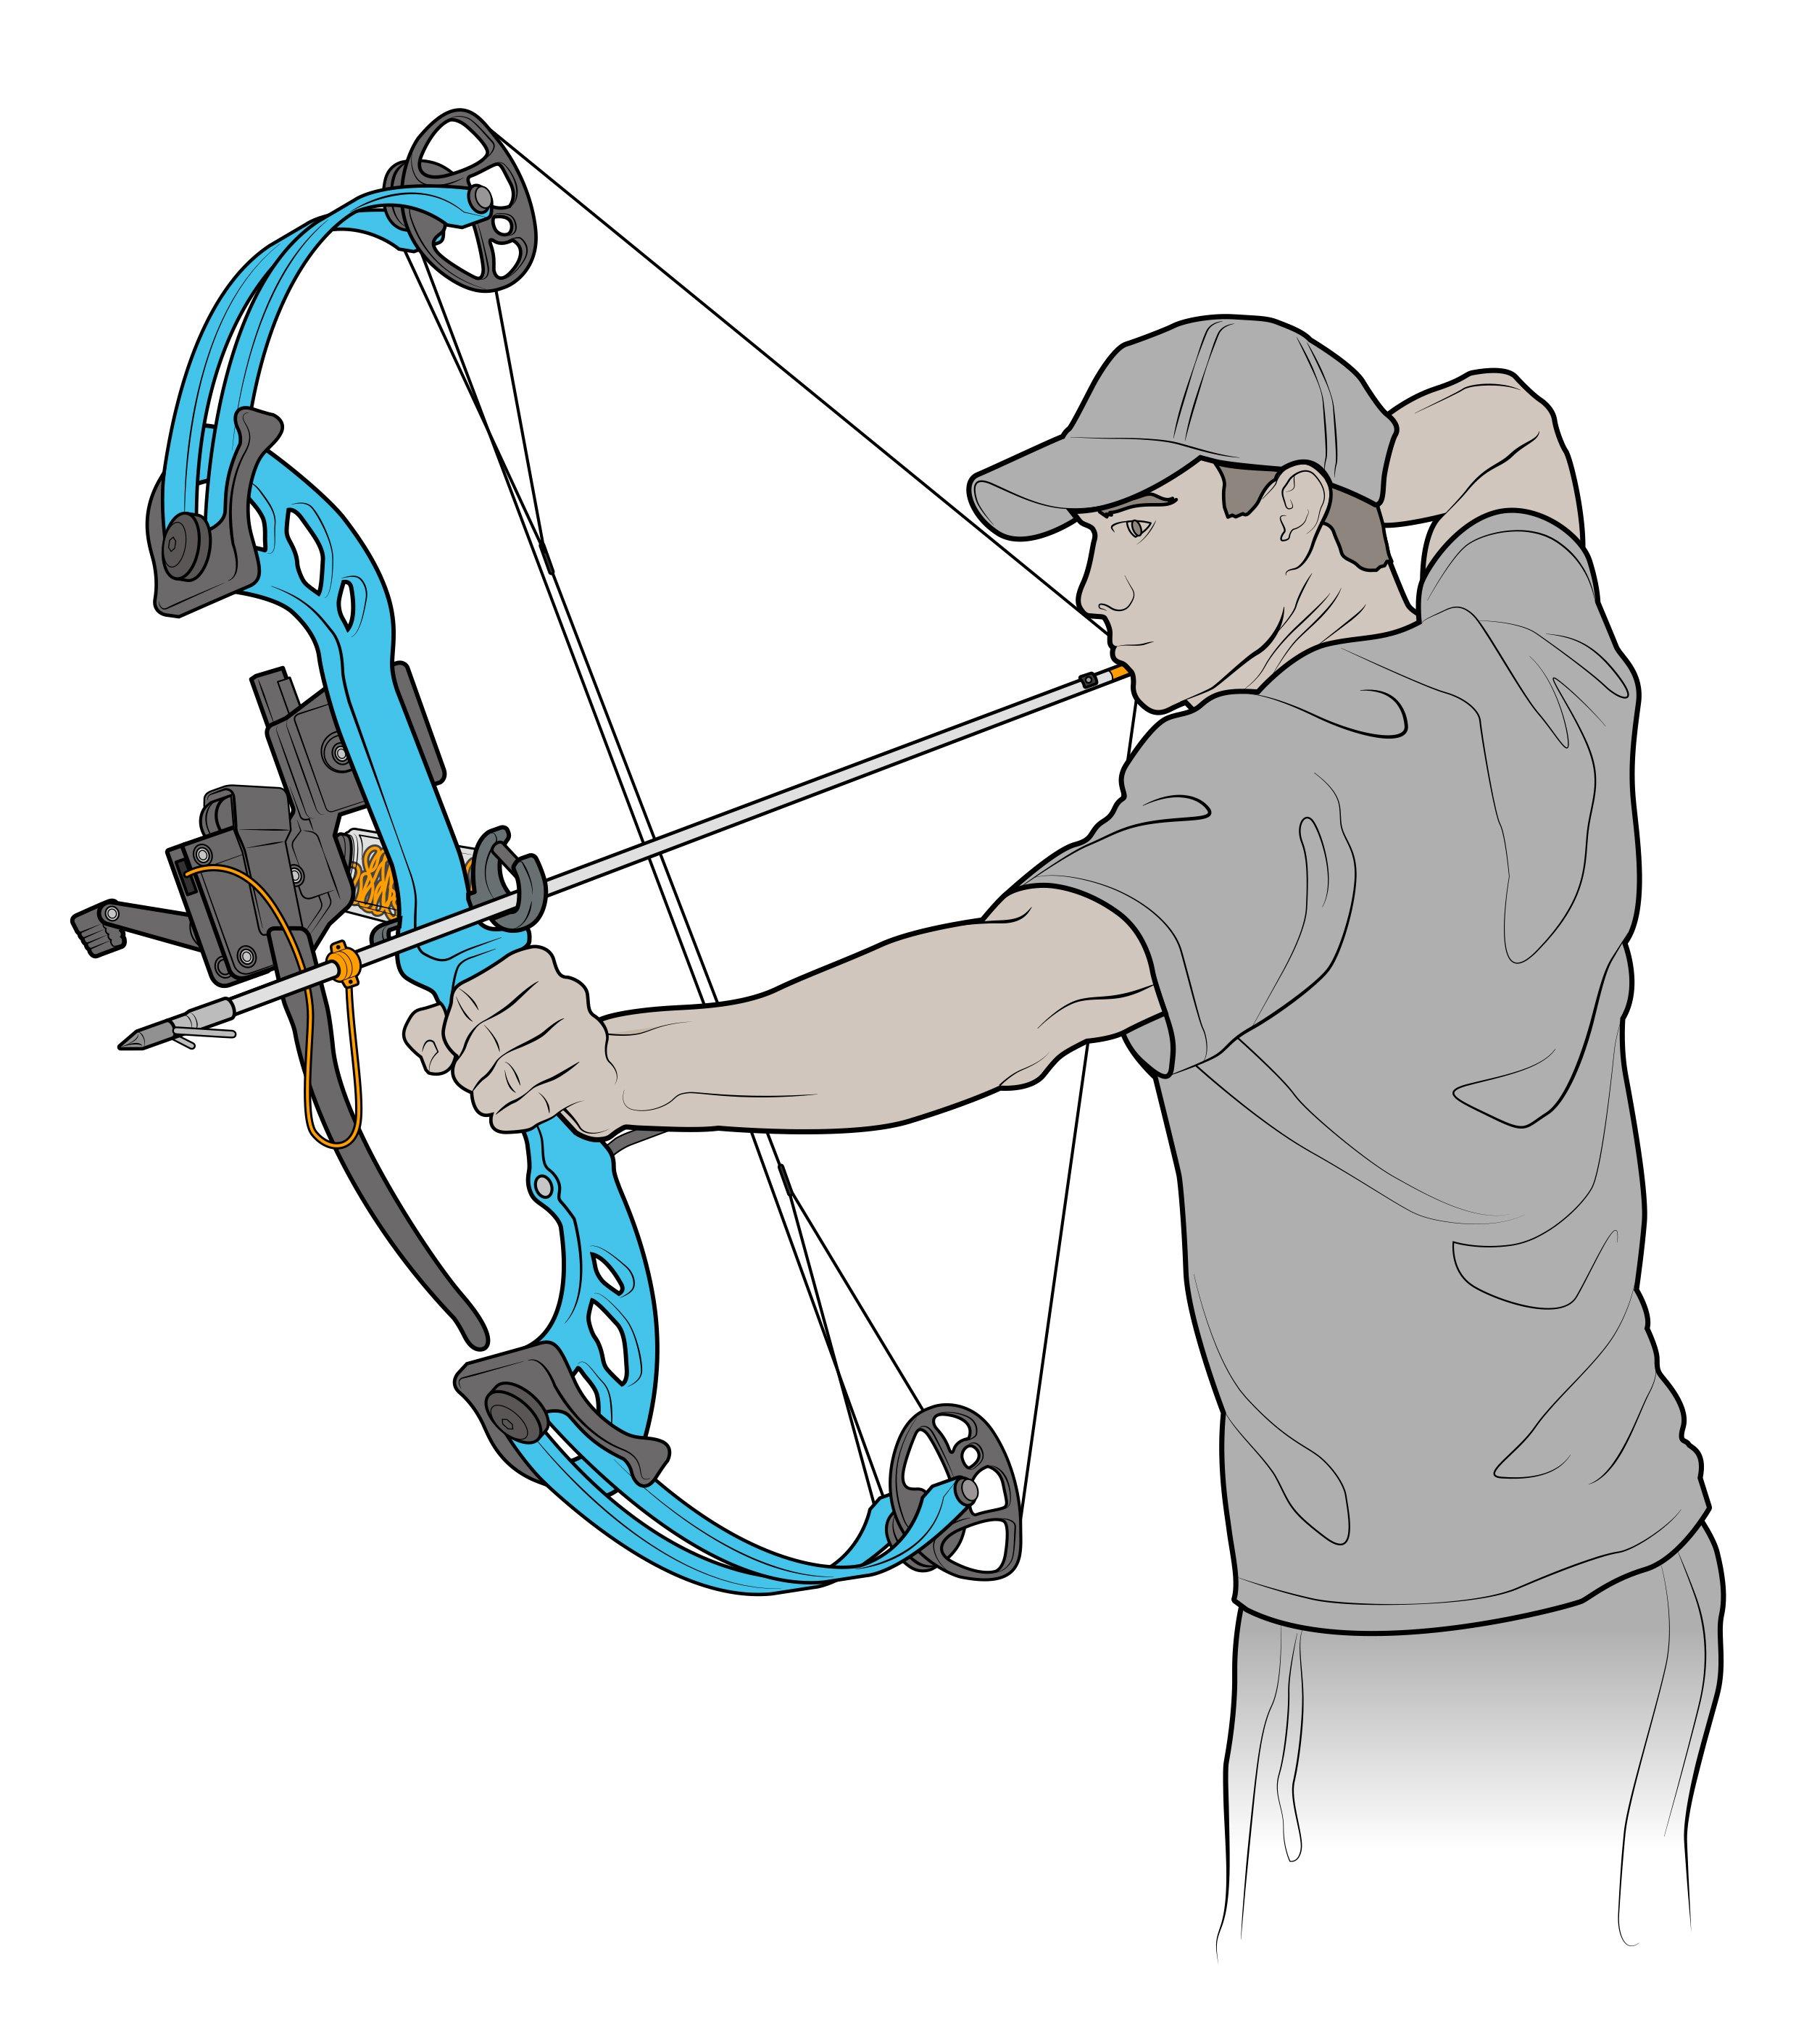 Learning to understand refraction, and how to aim, is one of the biggest hurdles in bowfishing. Illustration by Ryan Kirby 